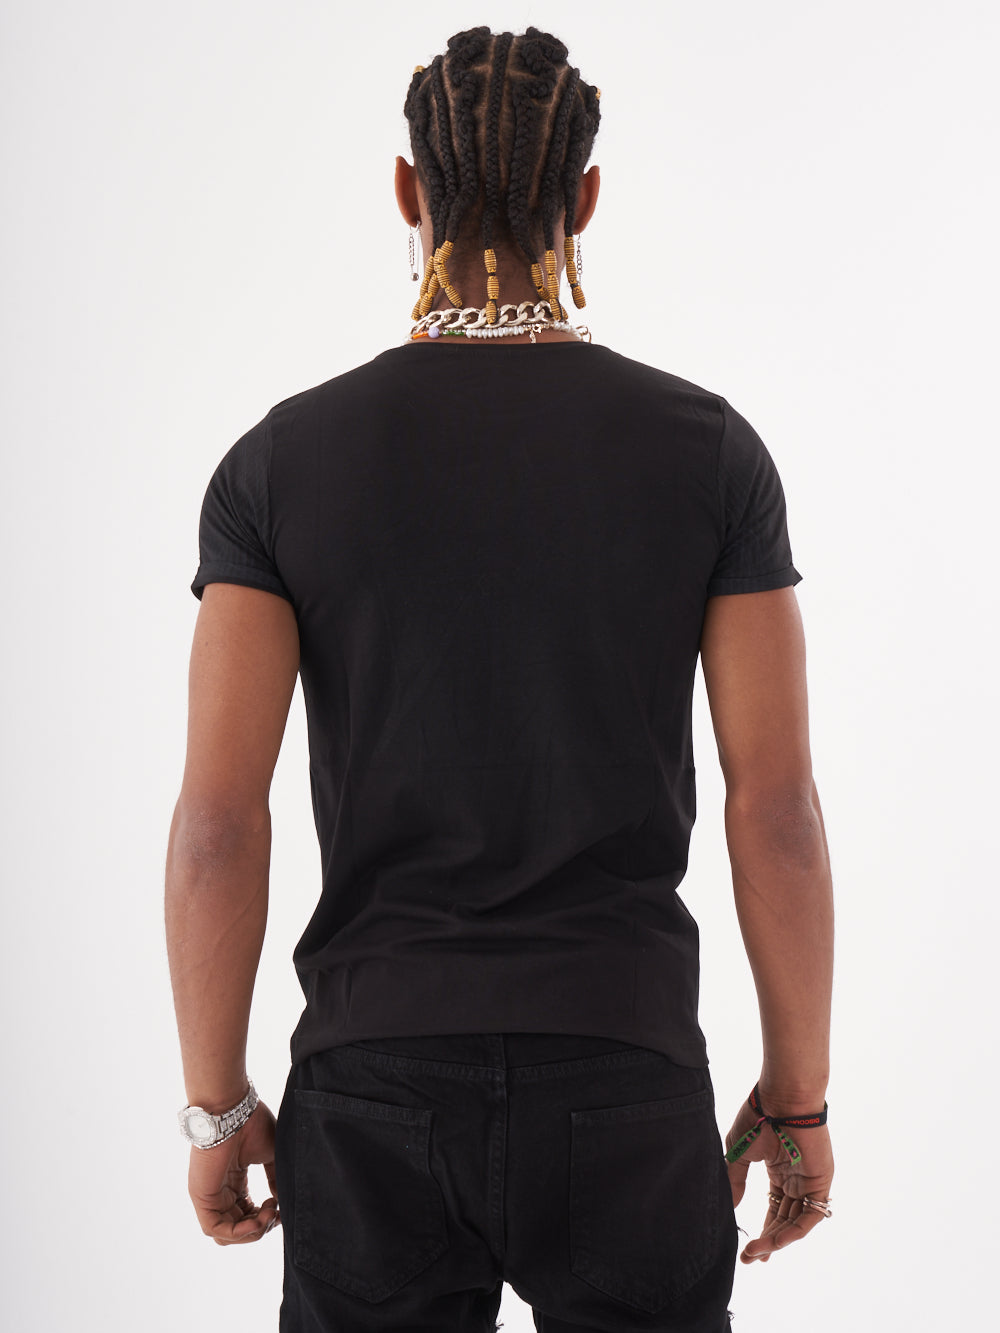 The back of a man wearing the NIRVANA skull-print embellished T-SHIRT in BLACK and relaxed fit black jeans.